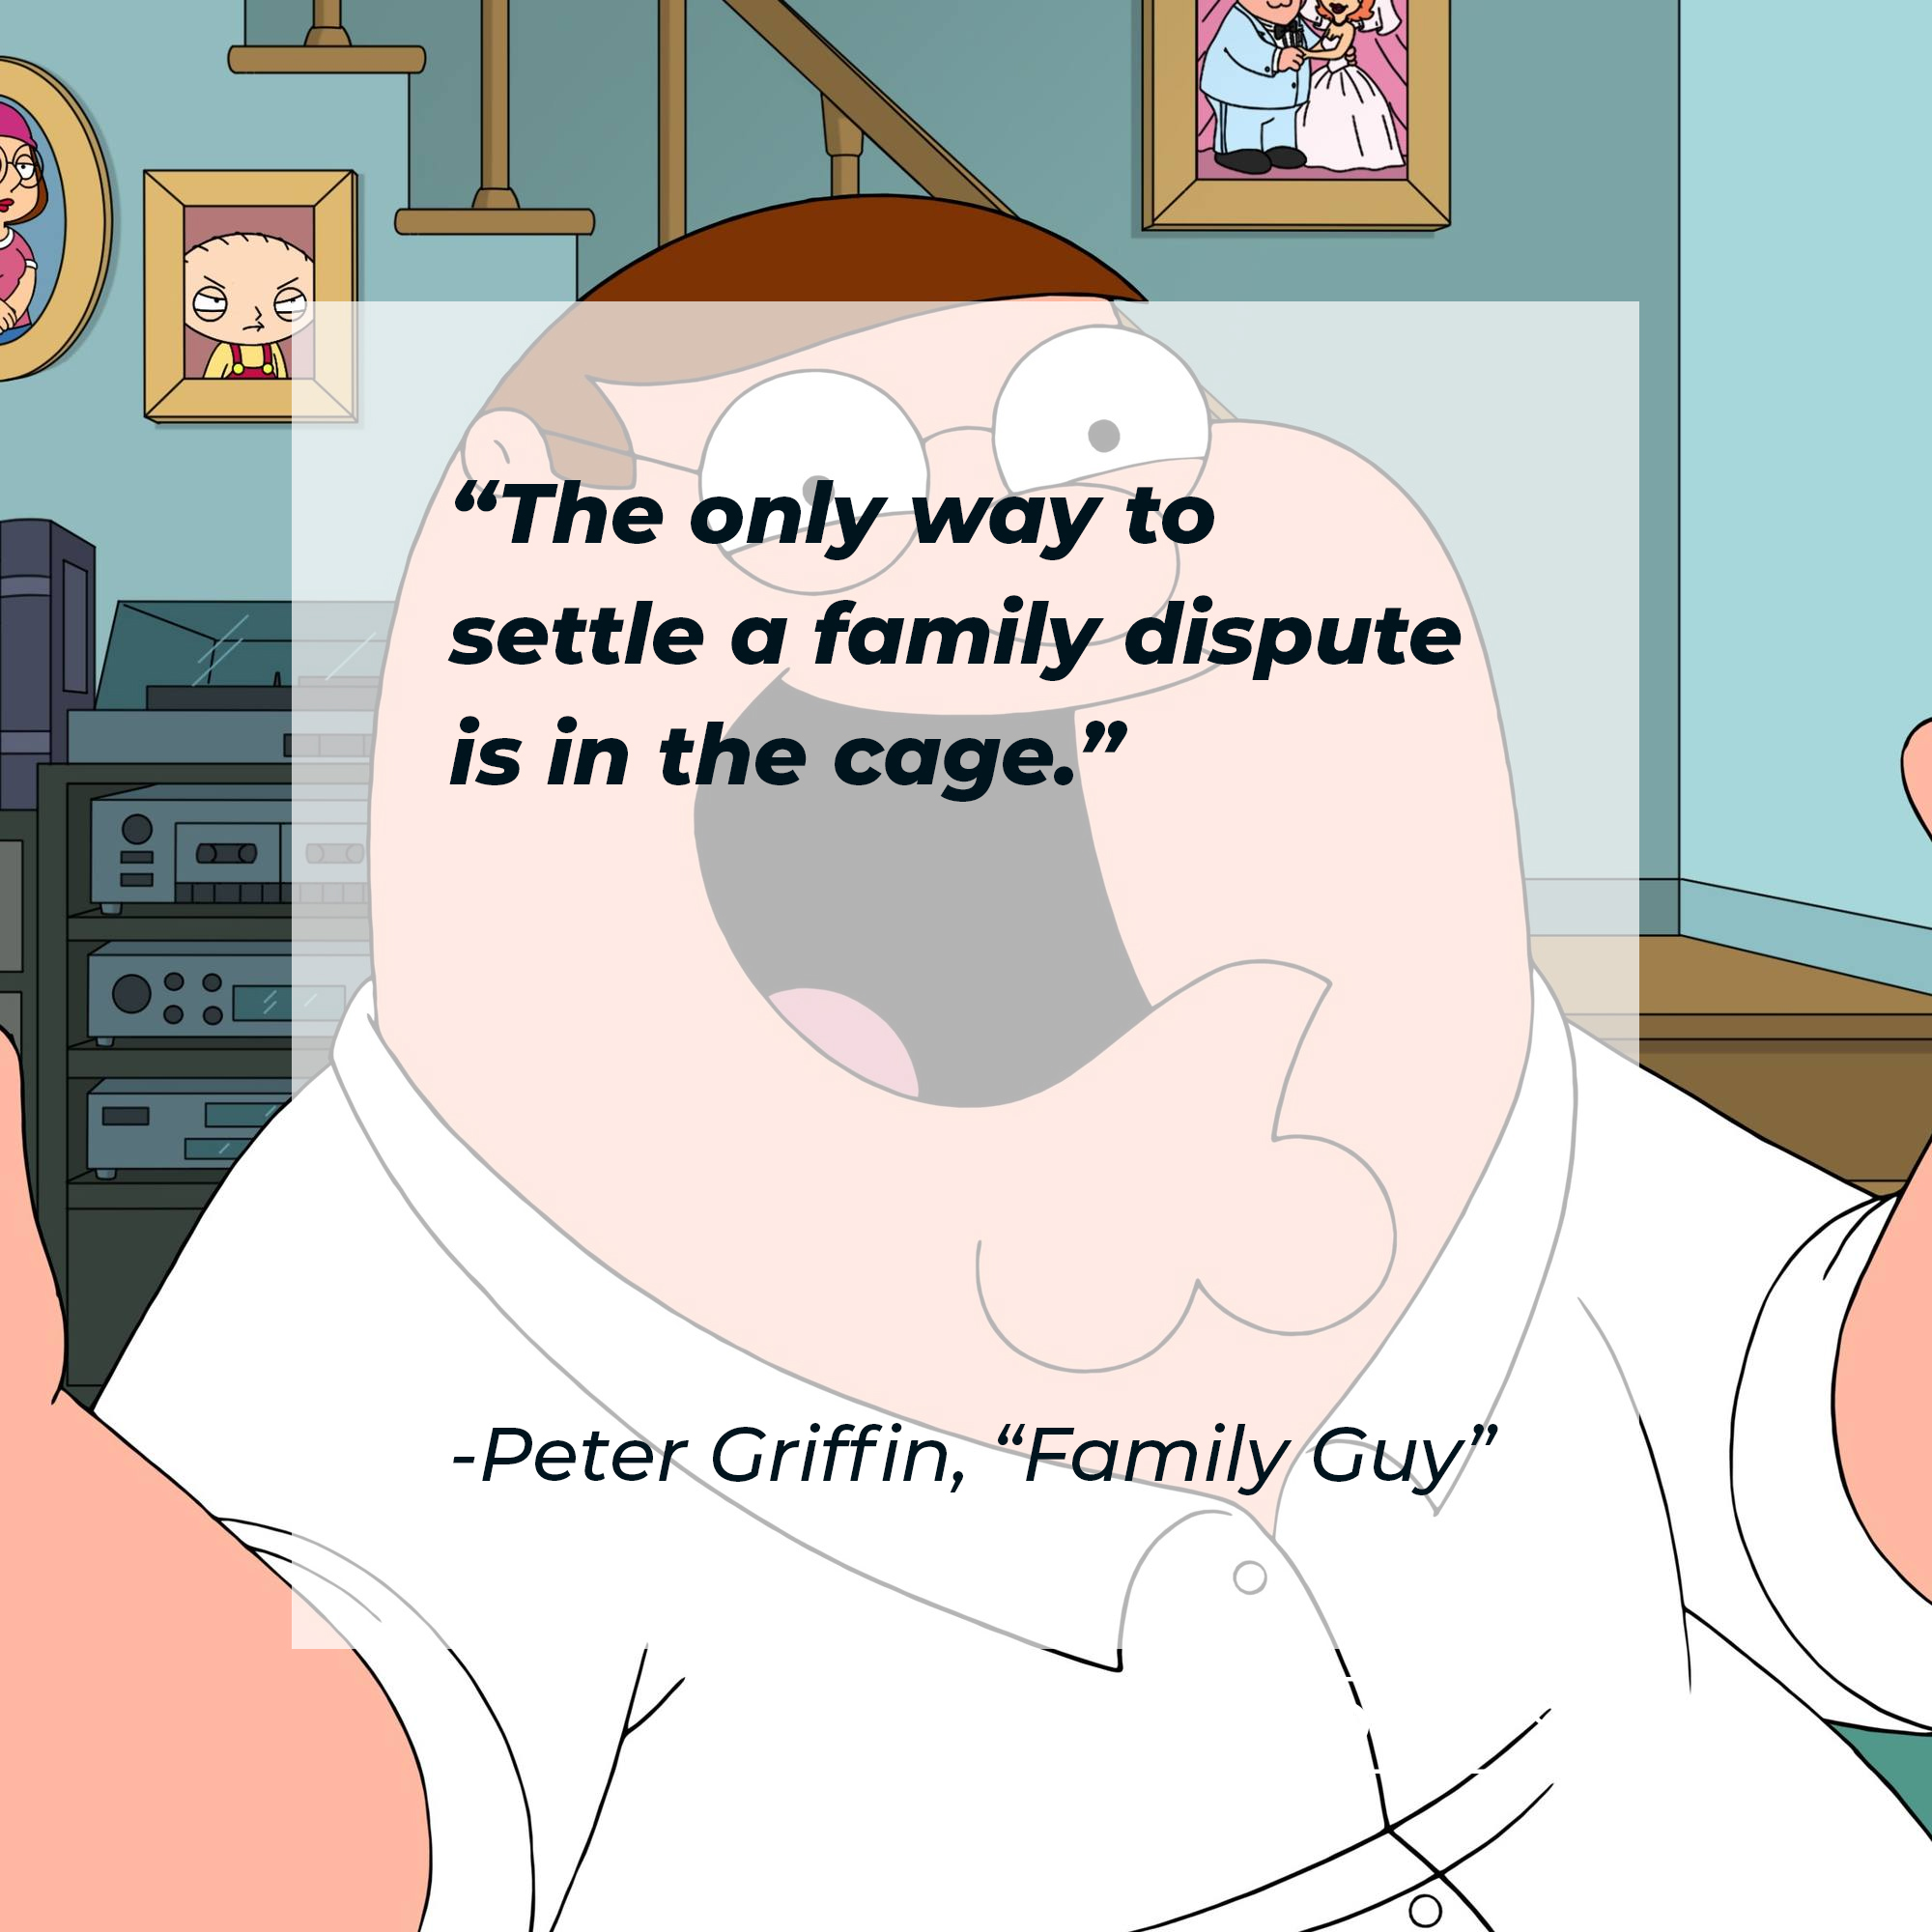 Peter Griffin's quote: "The only way to settle a family dispute is in the cage." | Source: facebook.com/FamilyGuy